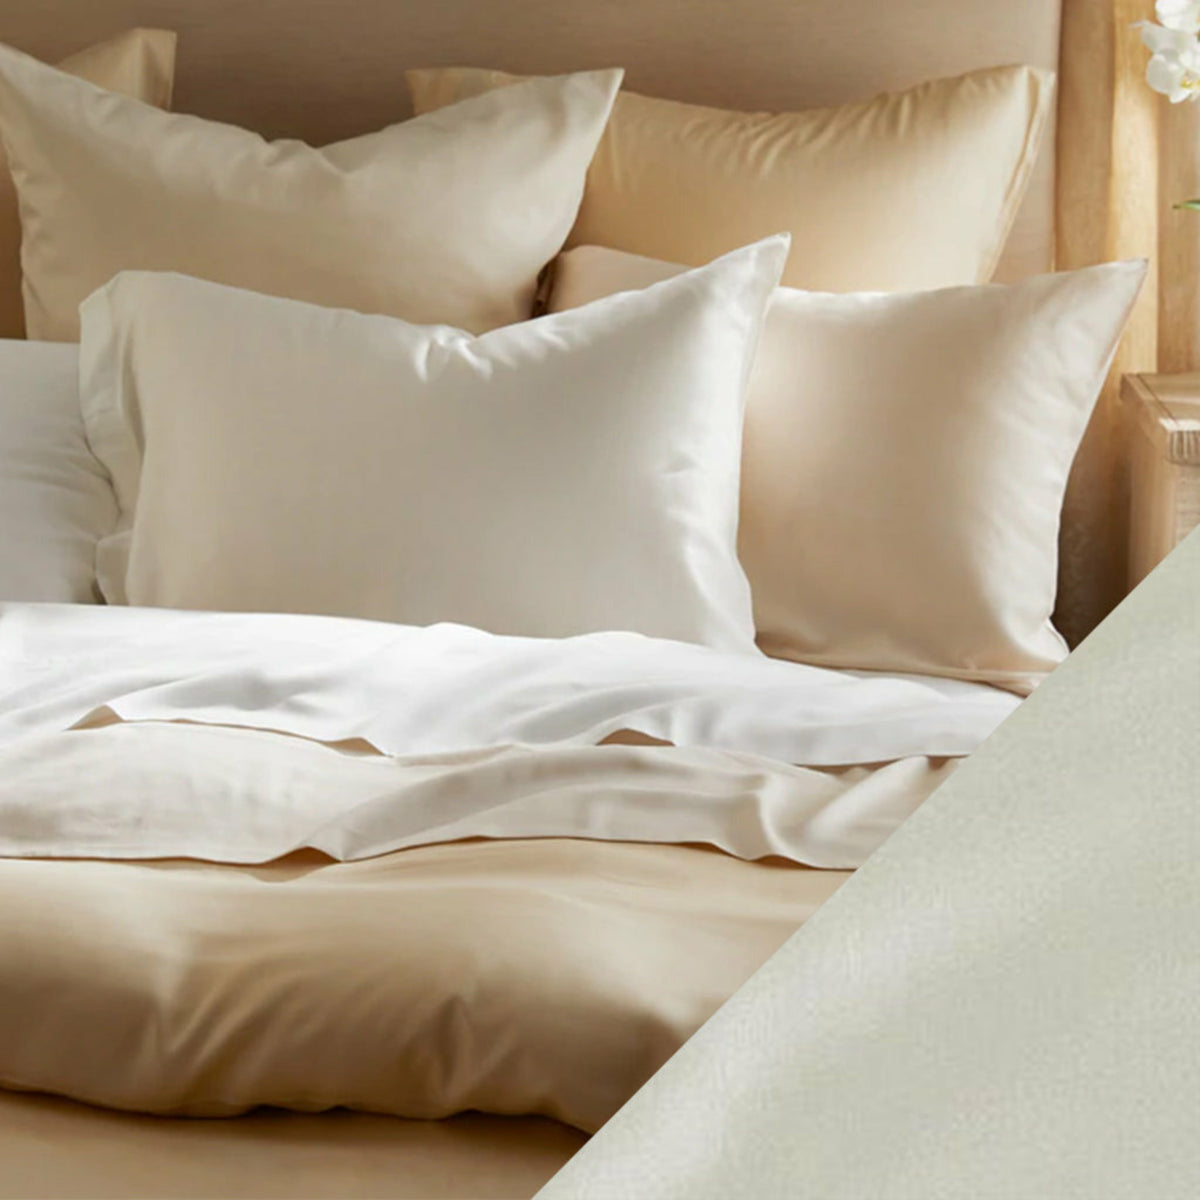 Main Lifestyle of SDH Legna Classic Bedding with Swatch of Sand